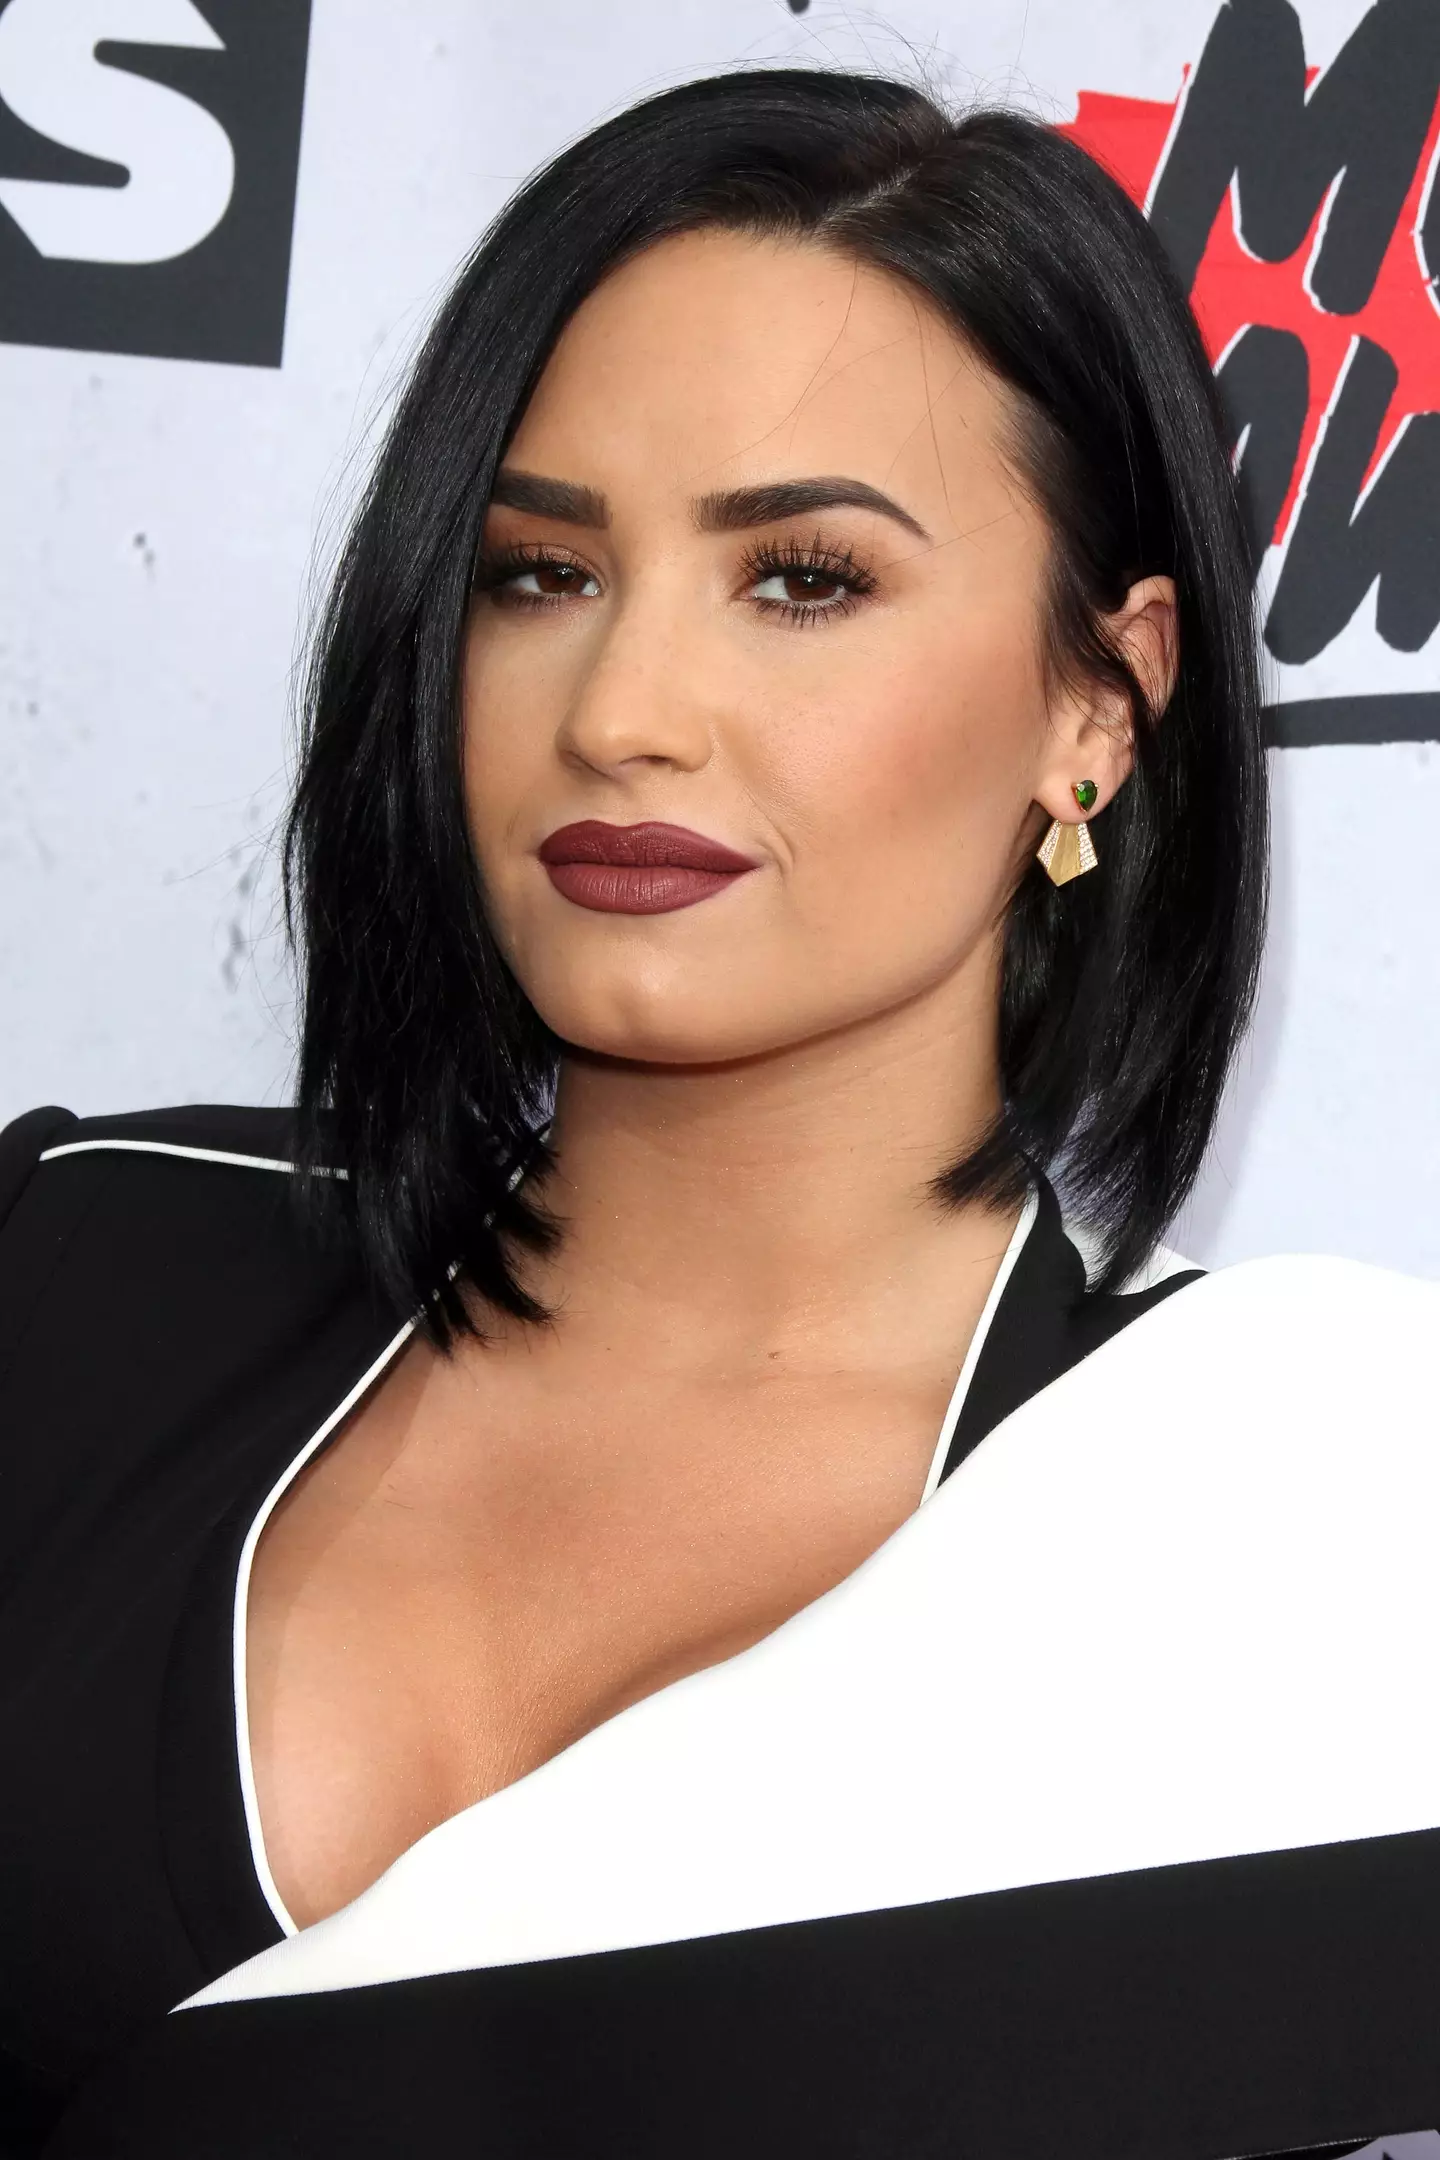 Lovato’s rehab stint came three years after their near-fatal opioid overdose.